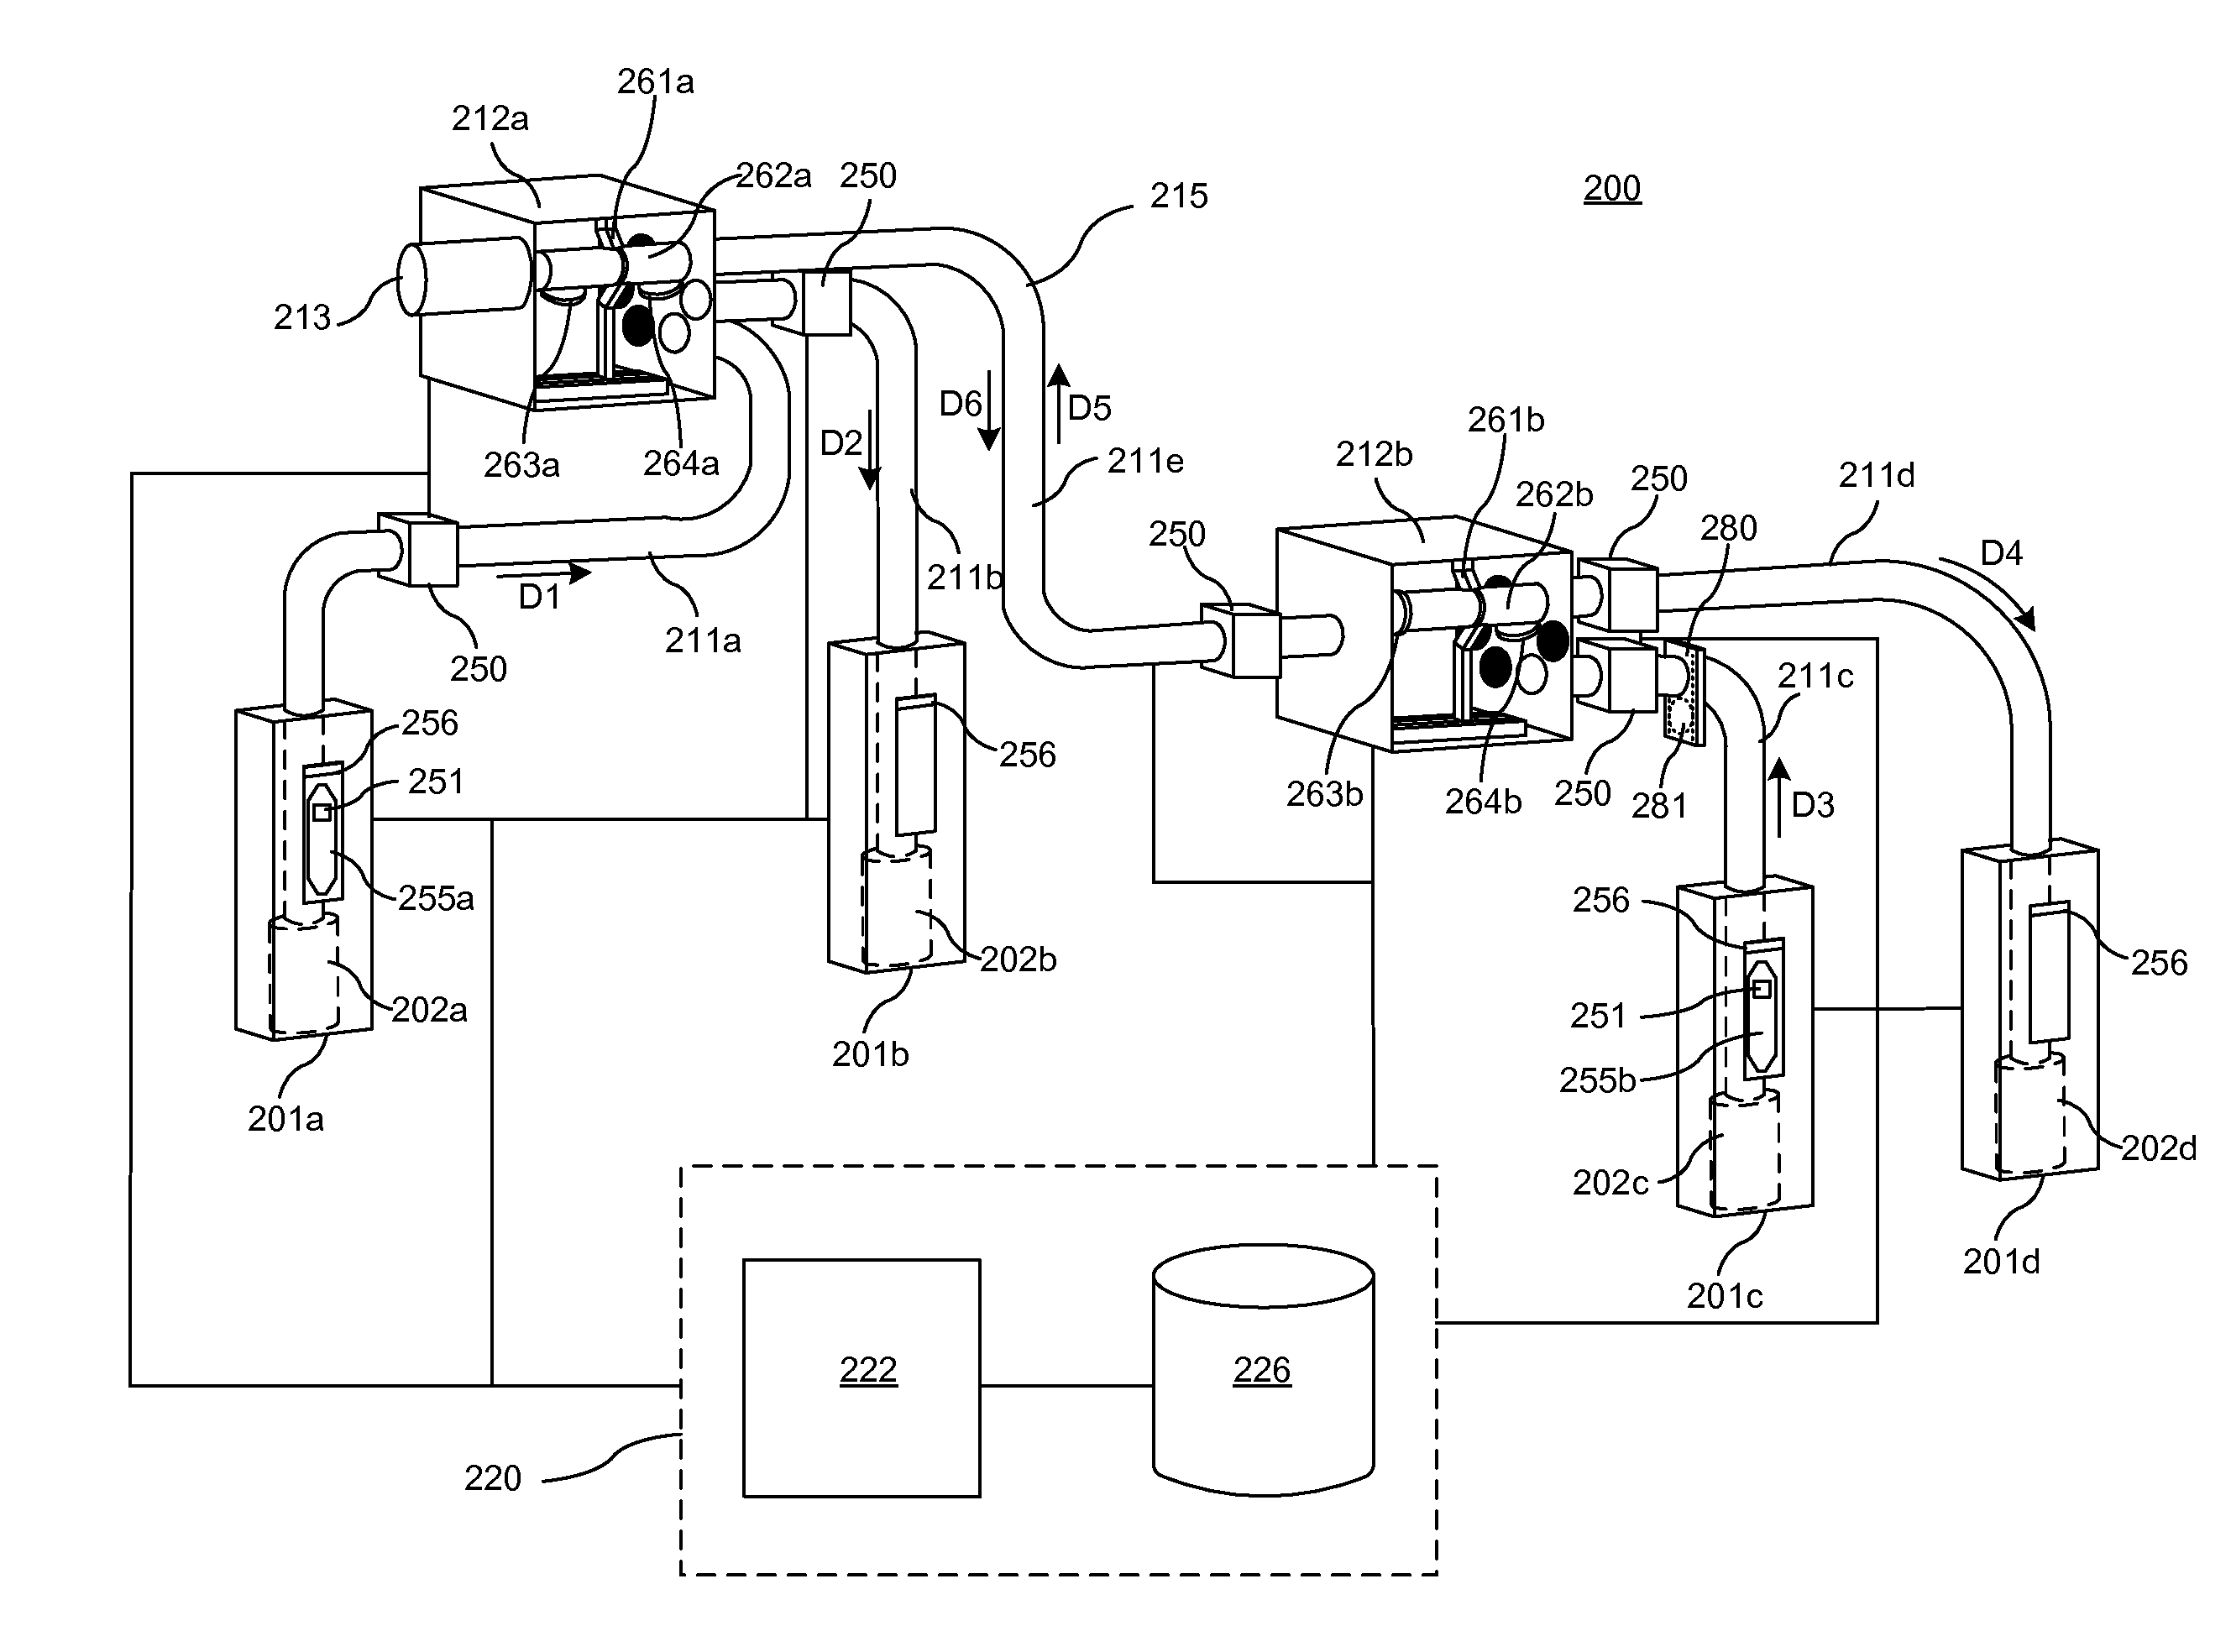 Pneumatic tube carrier system and method